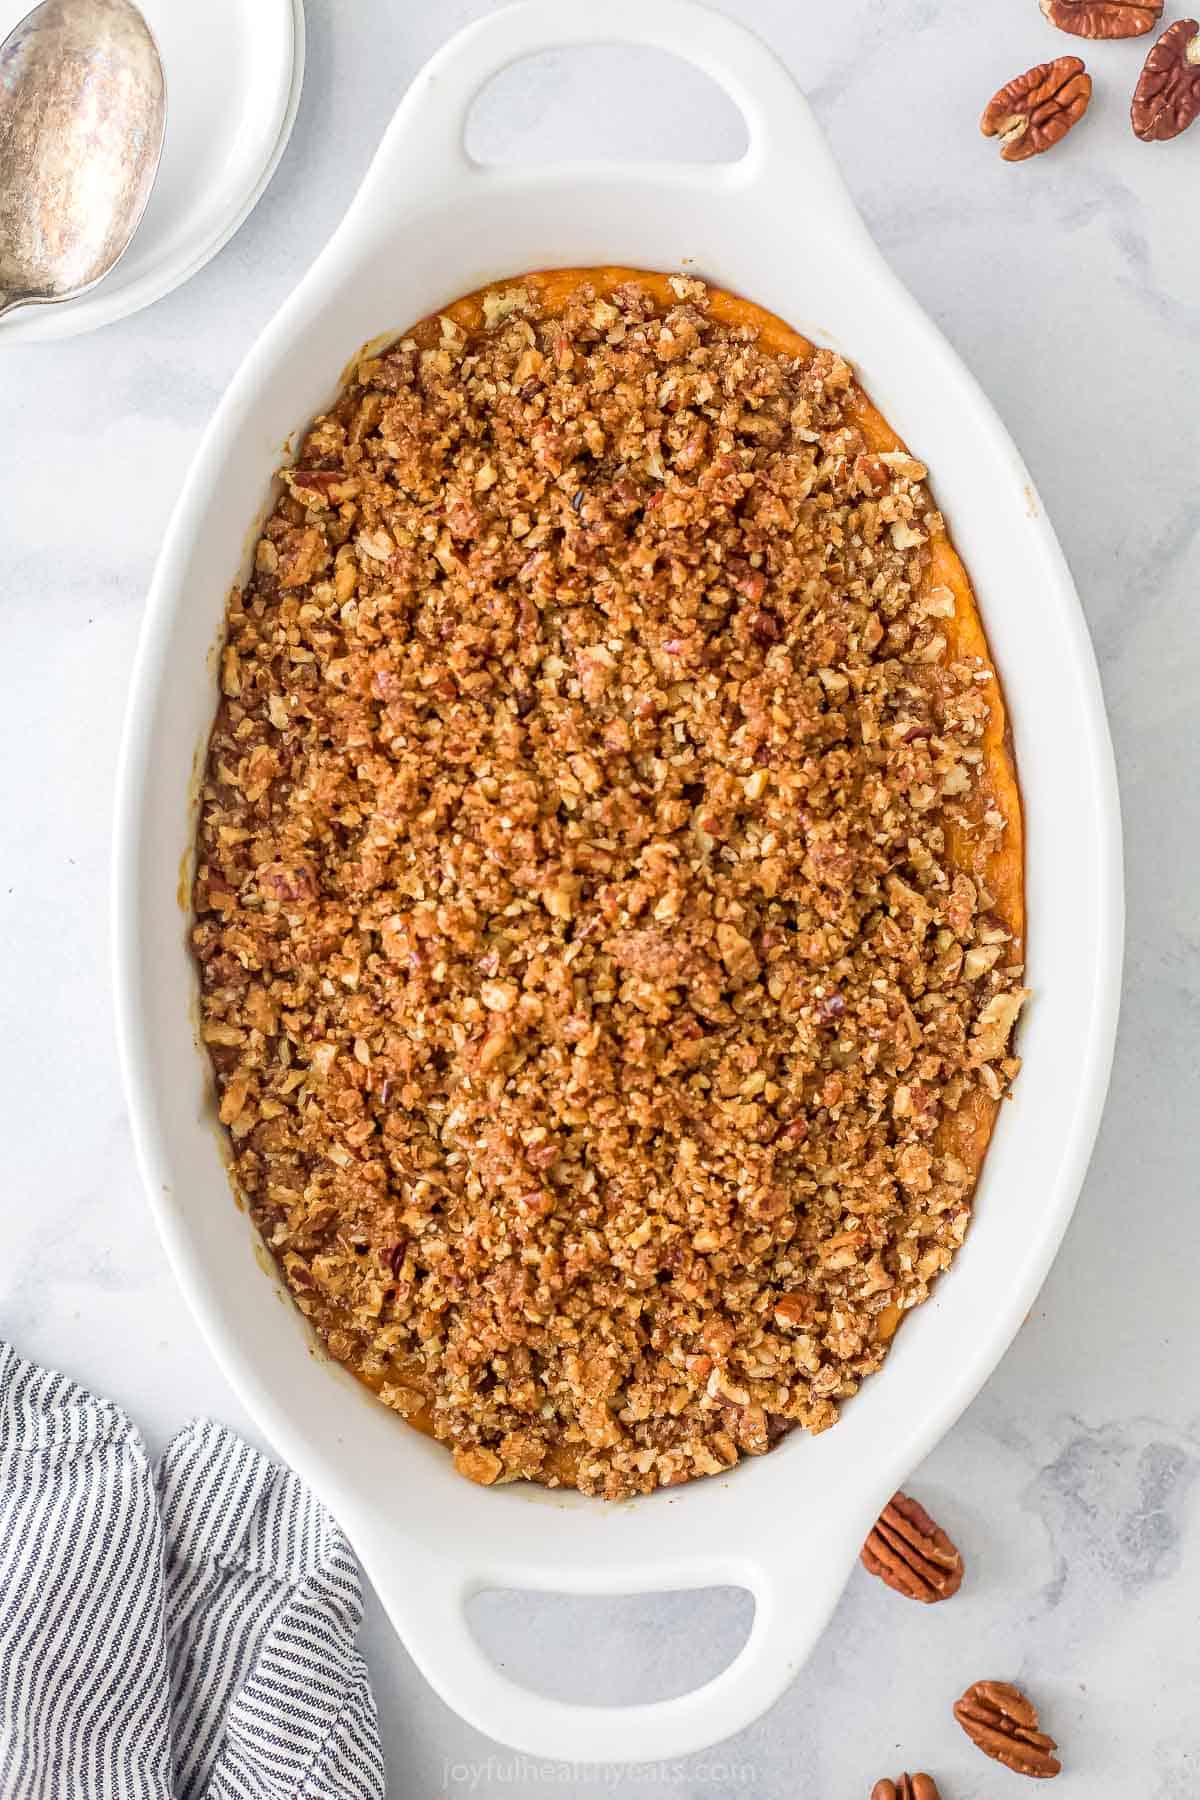 A baking dish with handles containing a freshly-baked sweet potato casserole with loose pecans on the counter beside it